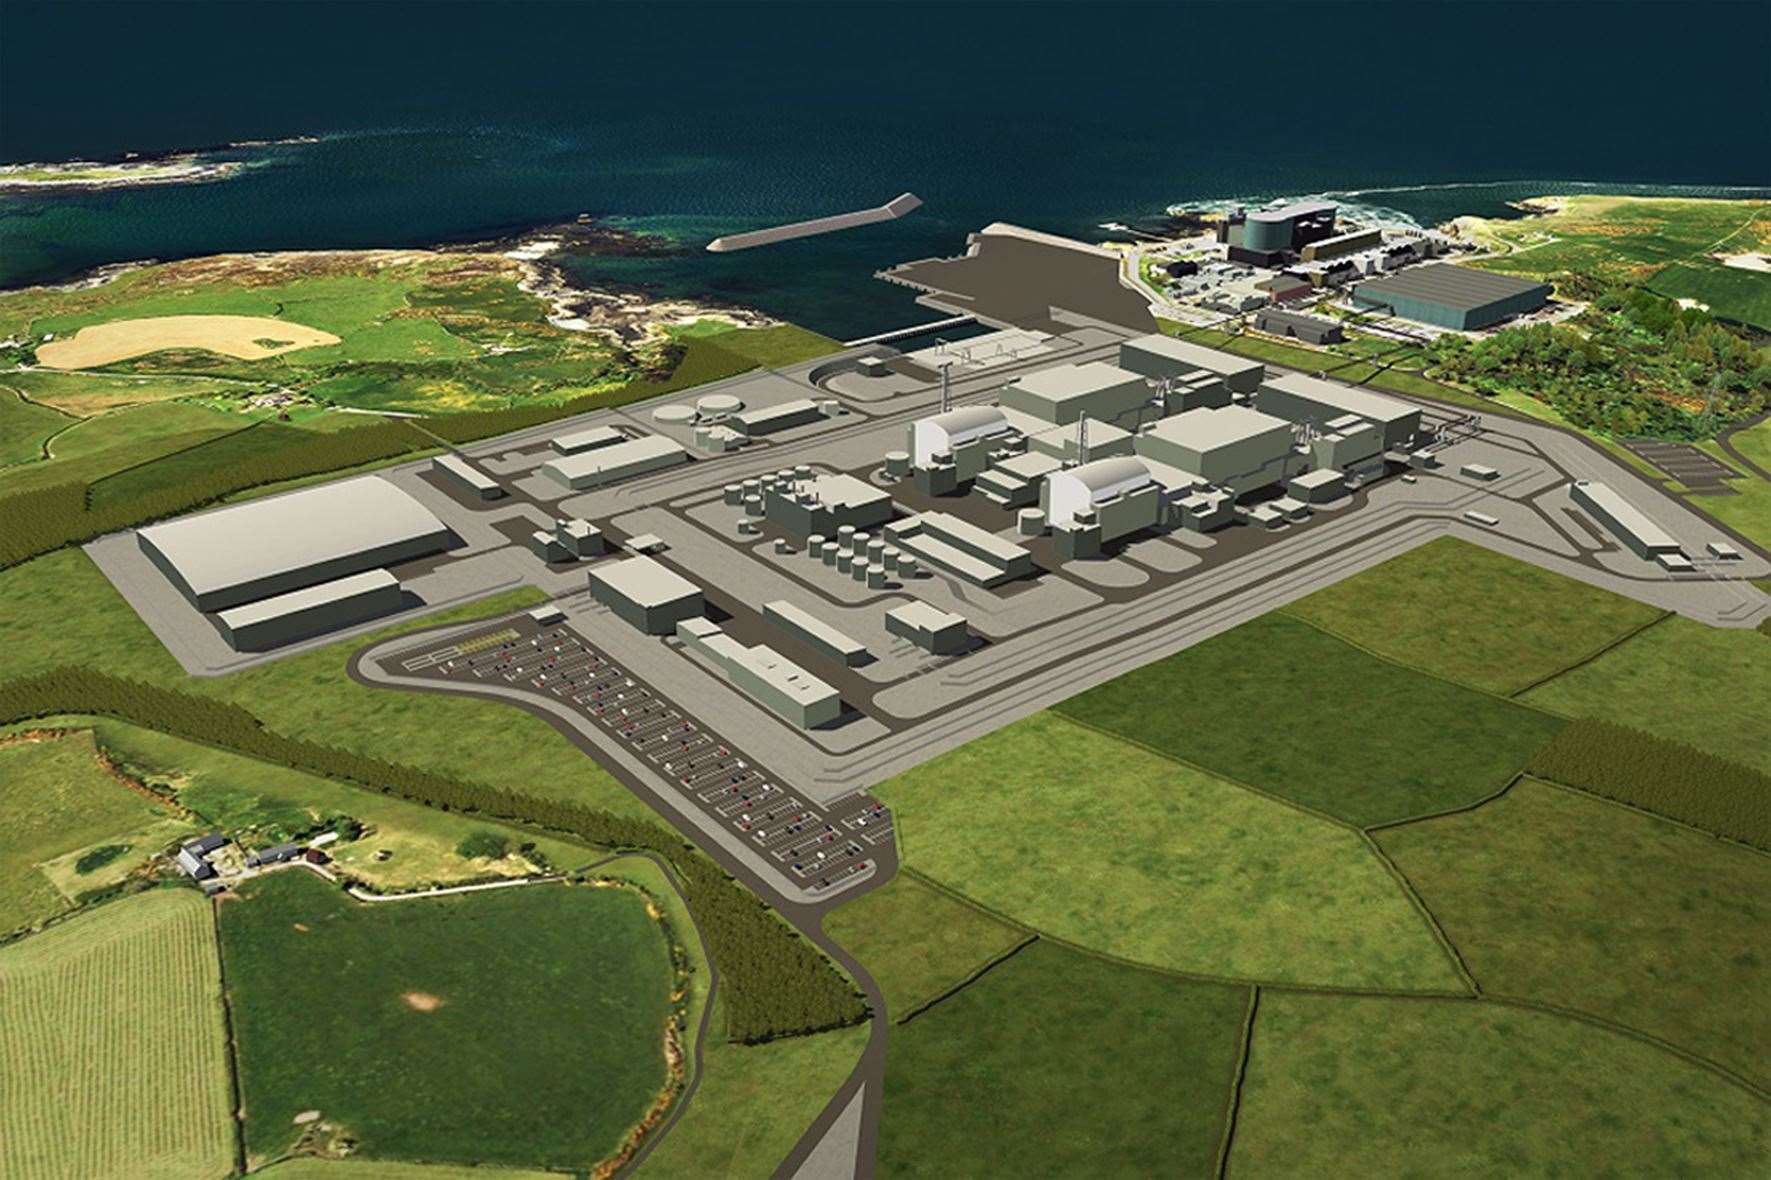 Artists impression of a planned nuclear power station at Wylfa on Anglesey in north Wales (Horizon/PA)